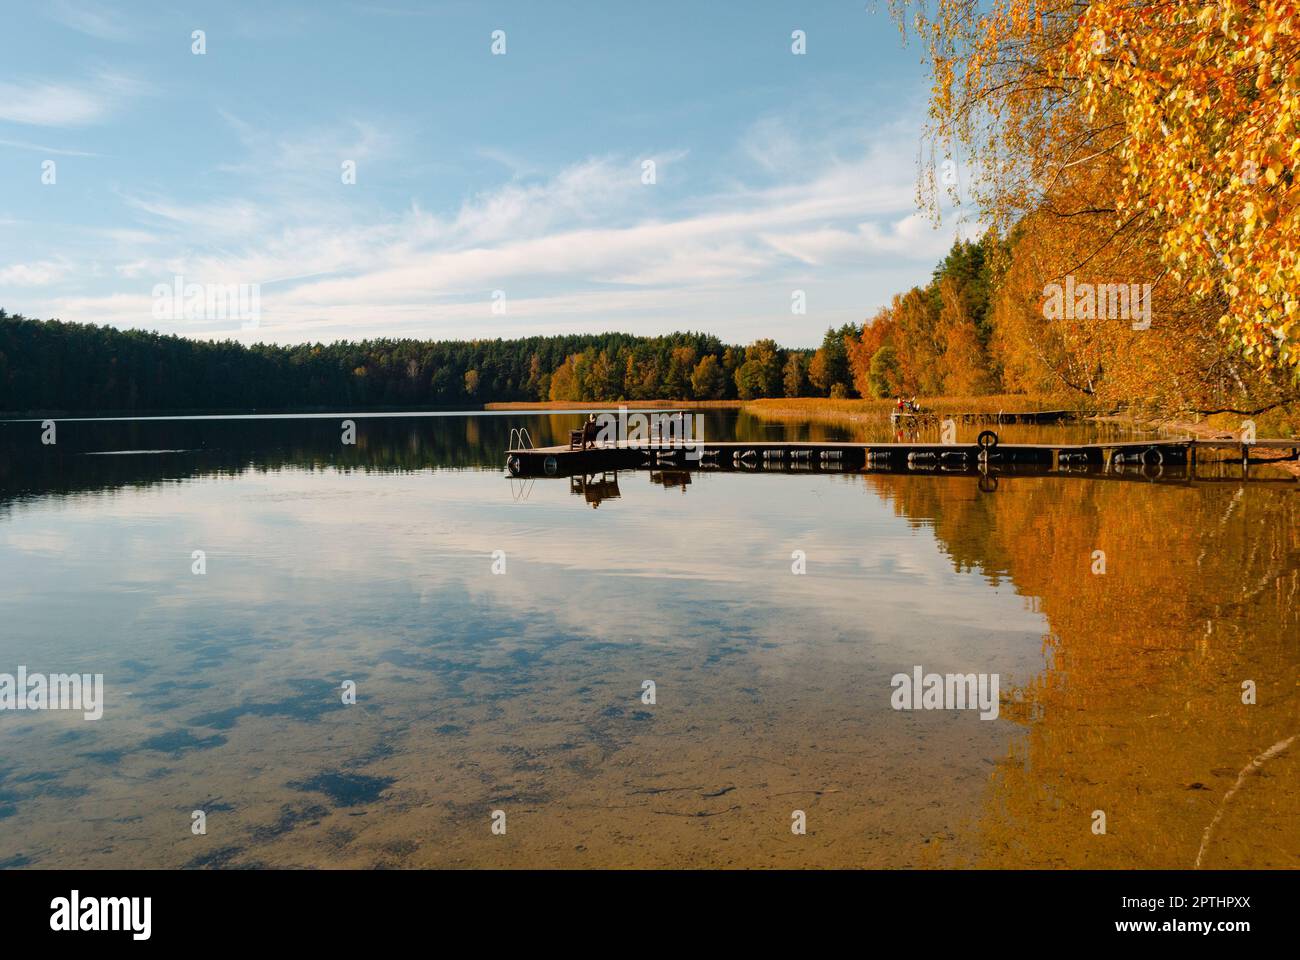 Lake Baltieji Lakajai with clear water in Labanoras Regional Park and a wooden marina with benches for relaxation. Autumn trees are covered in the wat Stock Photo